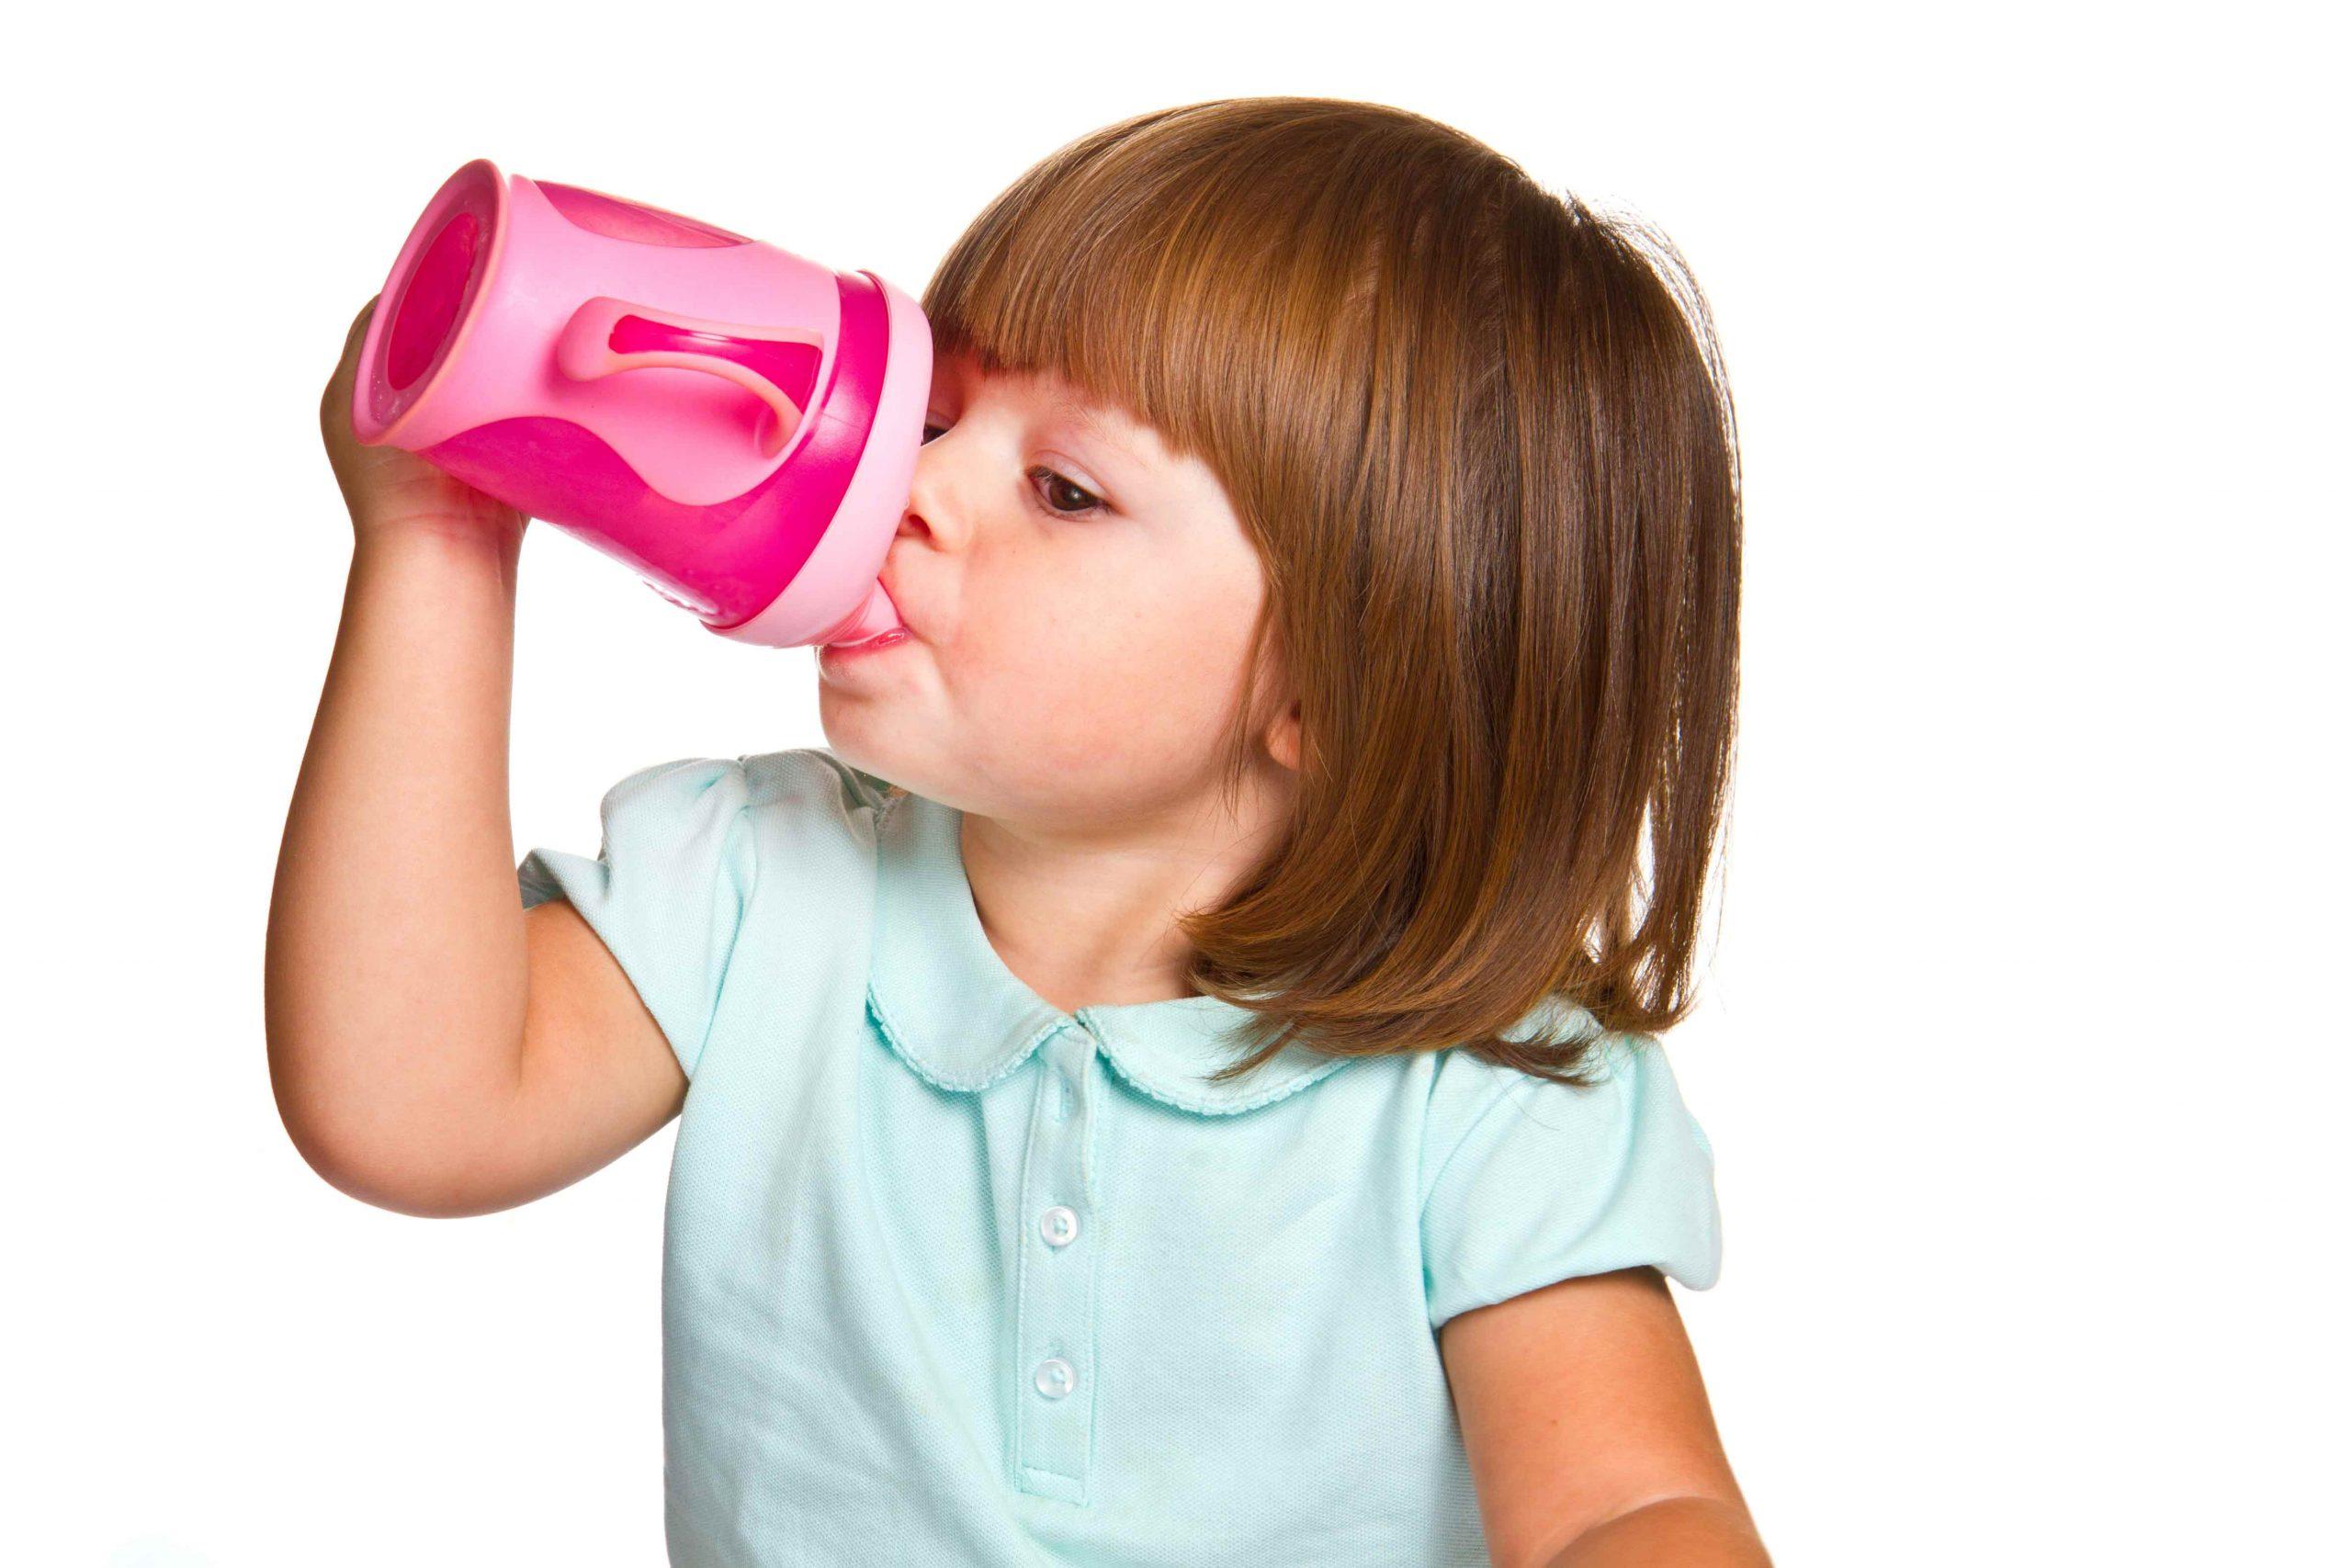 Transitioning To A Sippy Cup